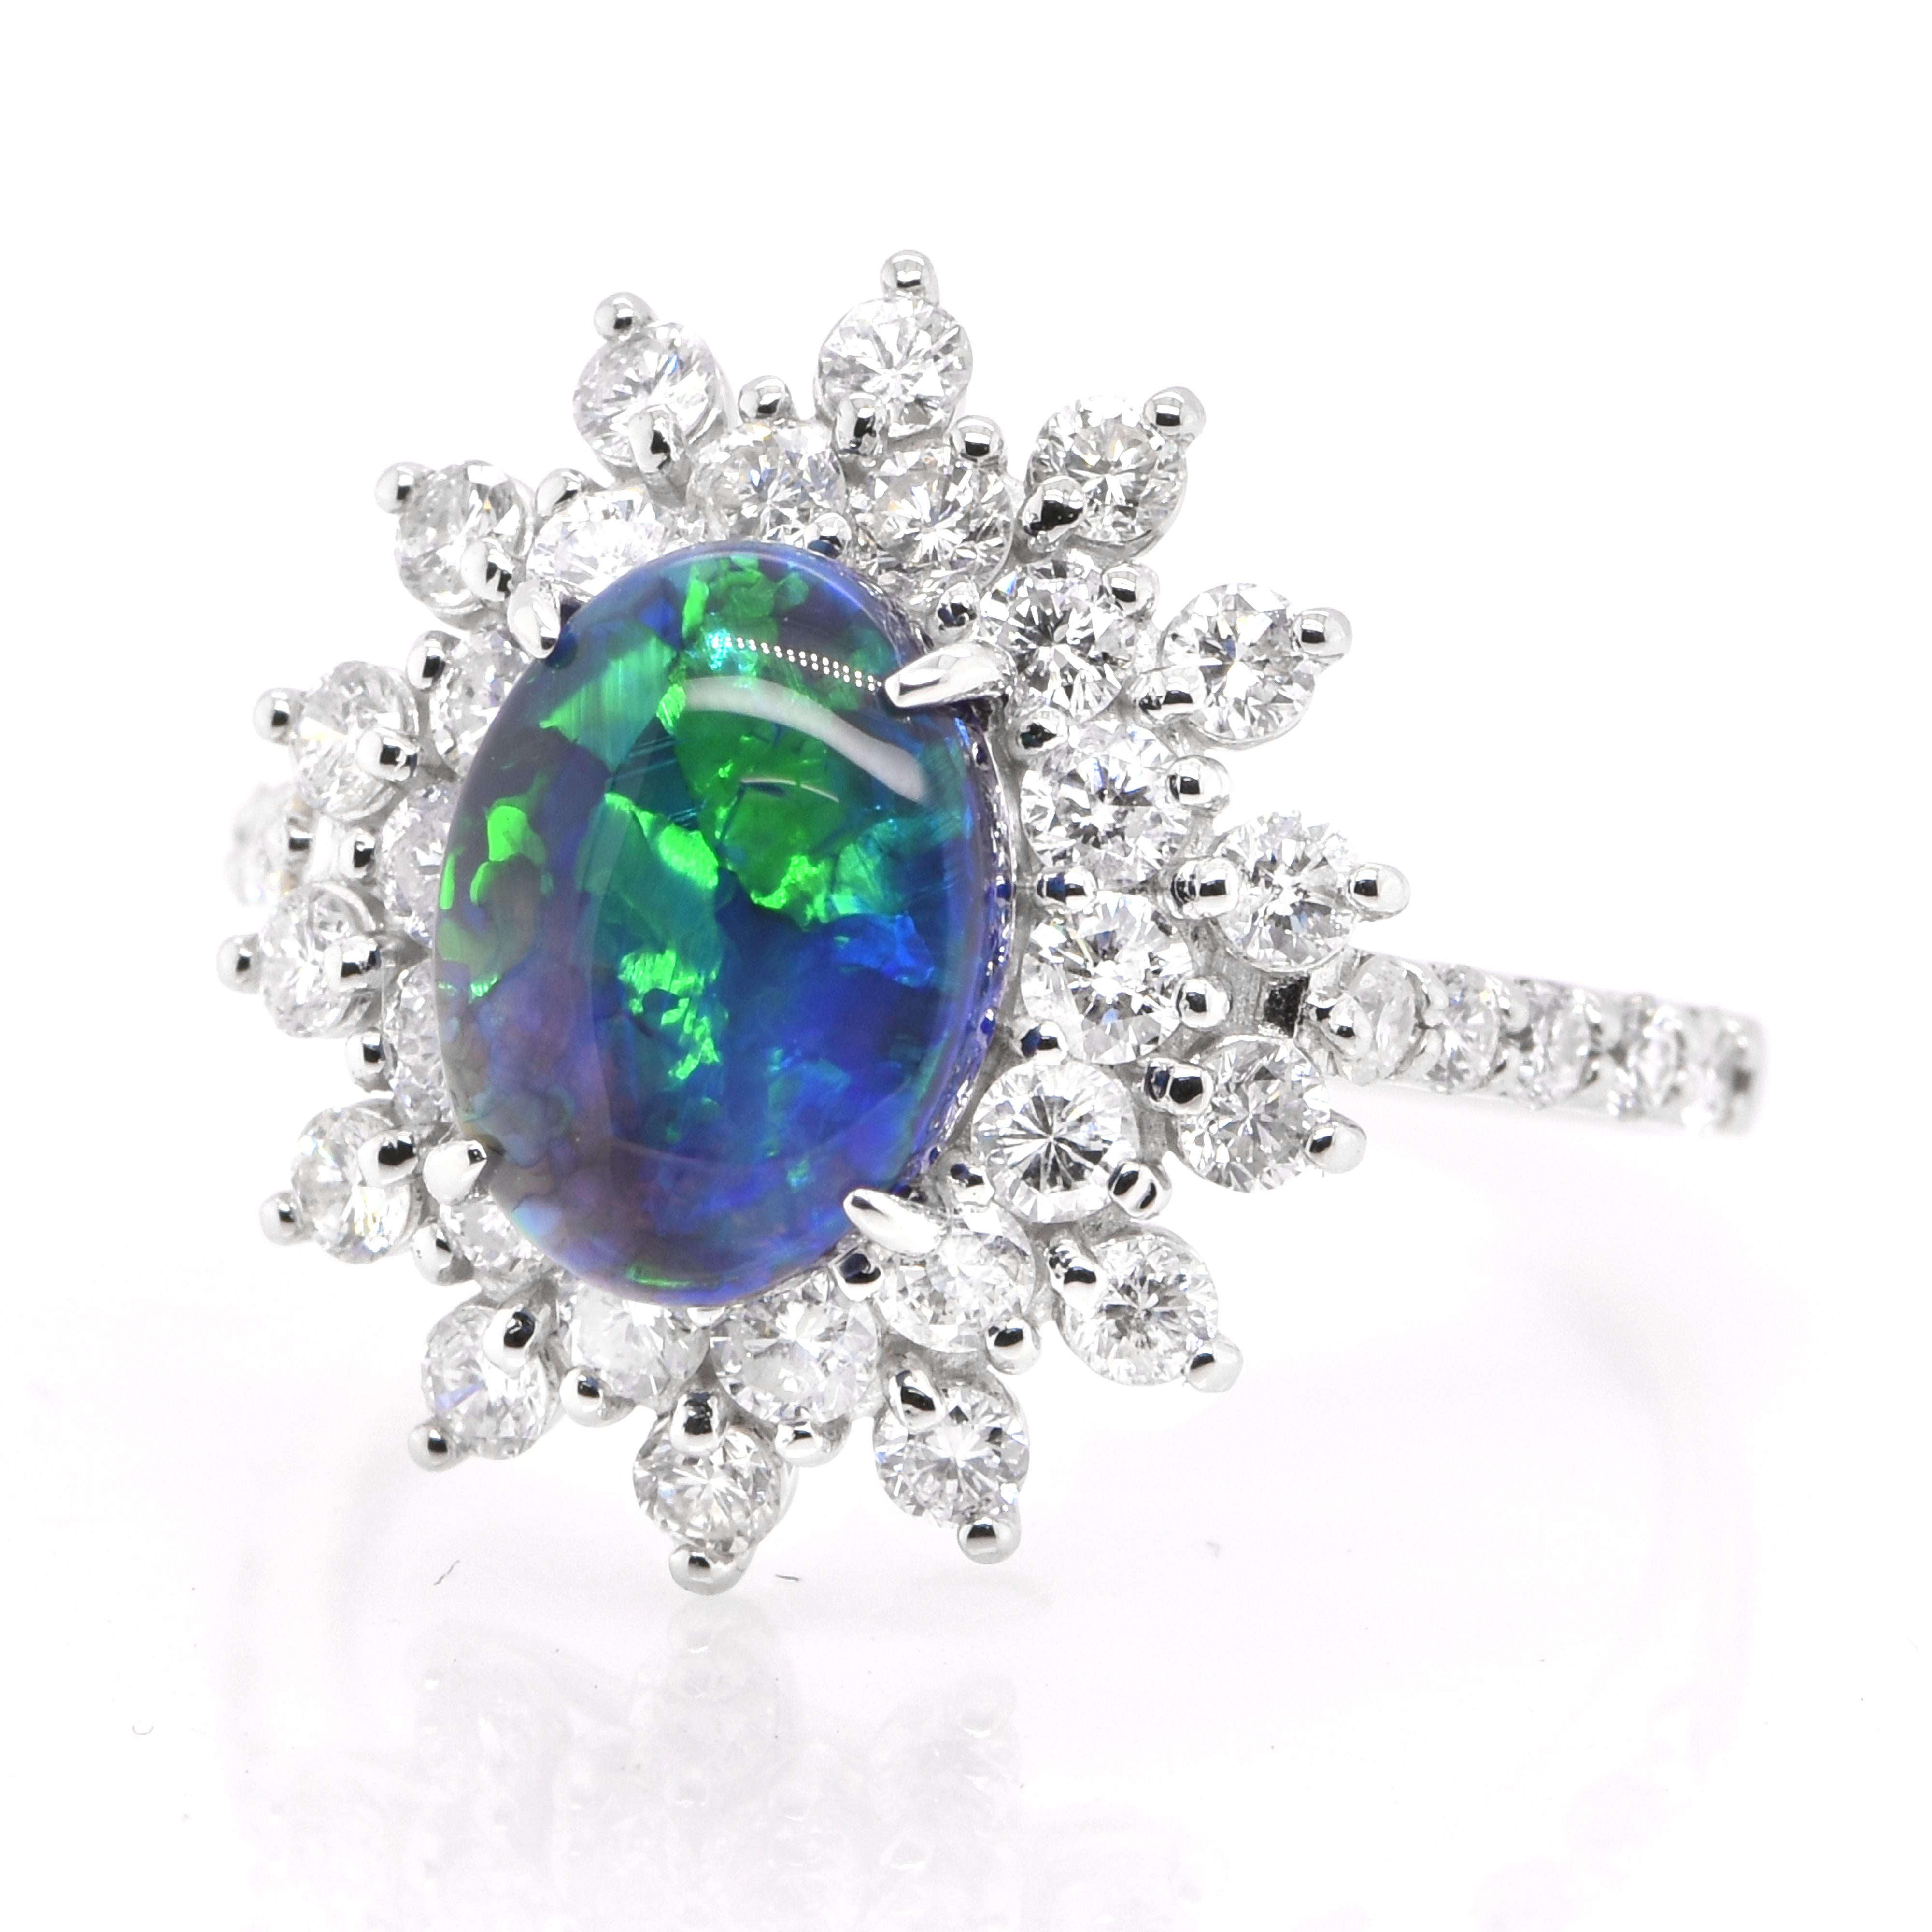 A beautiful ring featuring a 1.54 Carat, Natural, Australian (Lighting Ridge) Black Opal and 1.15 Carats of Diamond Accents set in Platinum. The Opal displays very good play of color! Opals are known for exhibiting flashes of rainbow colors known as